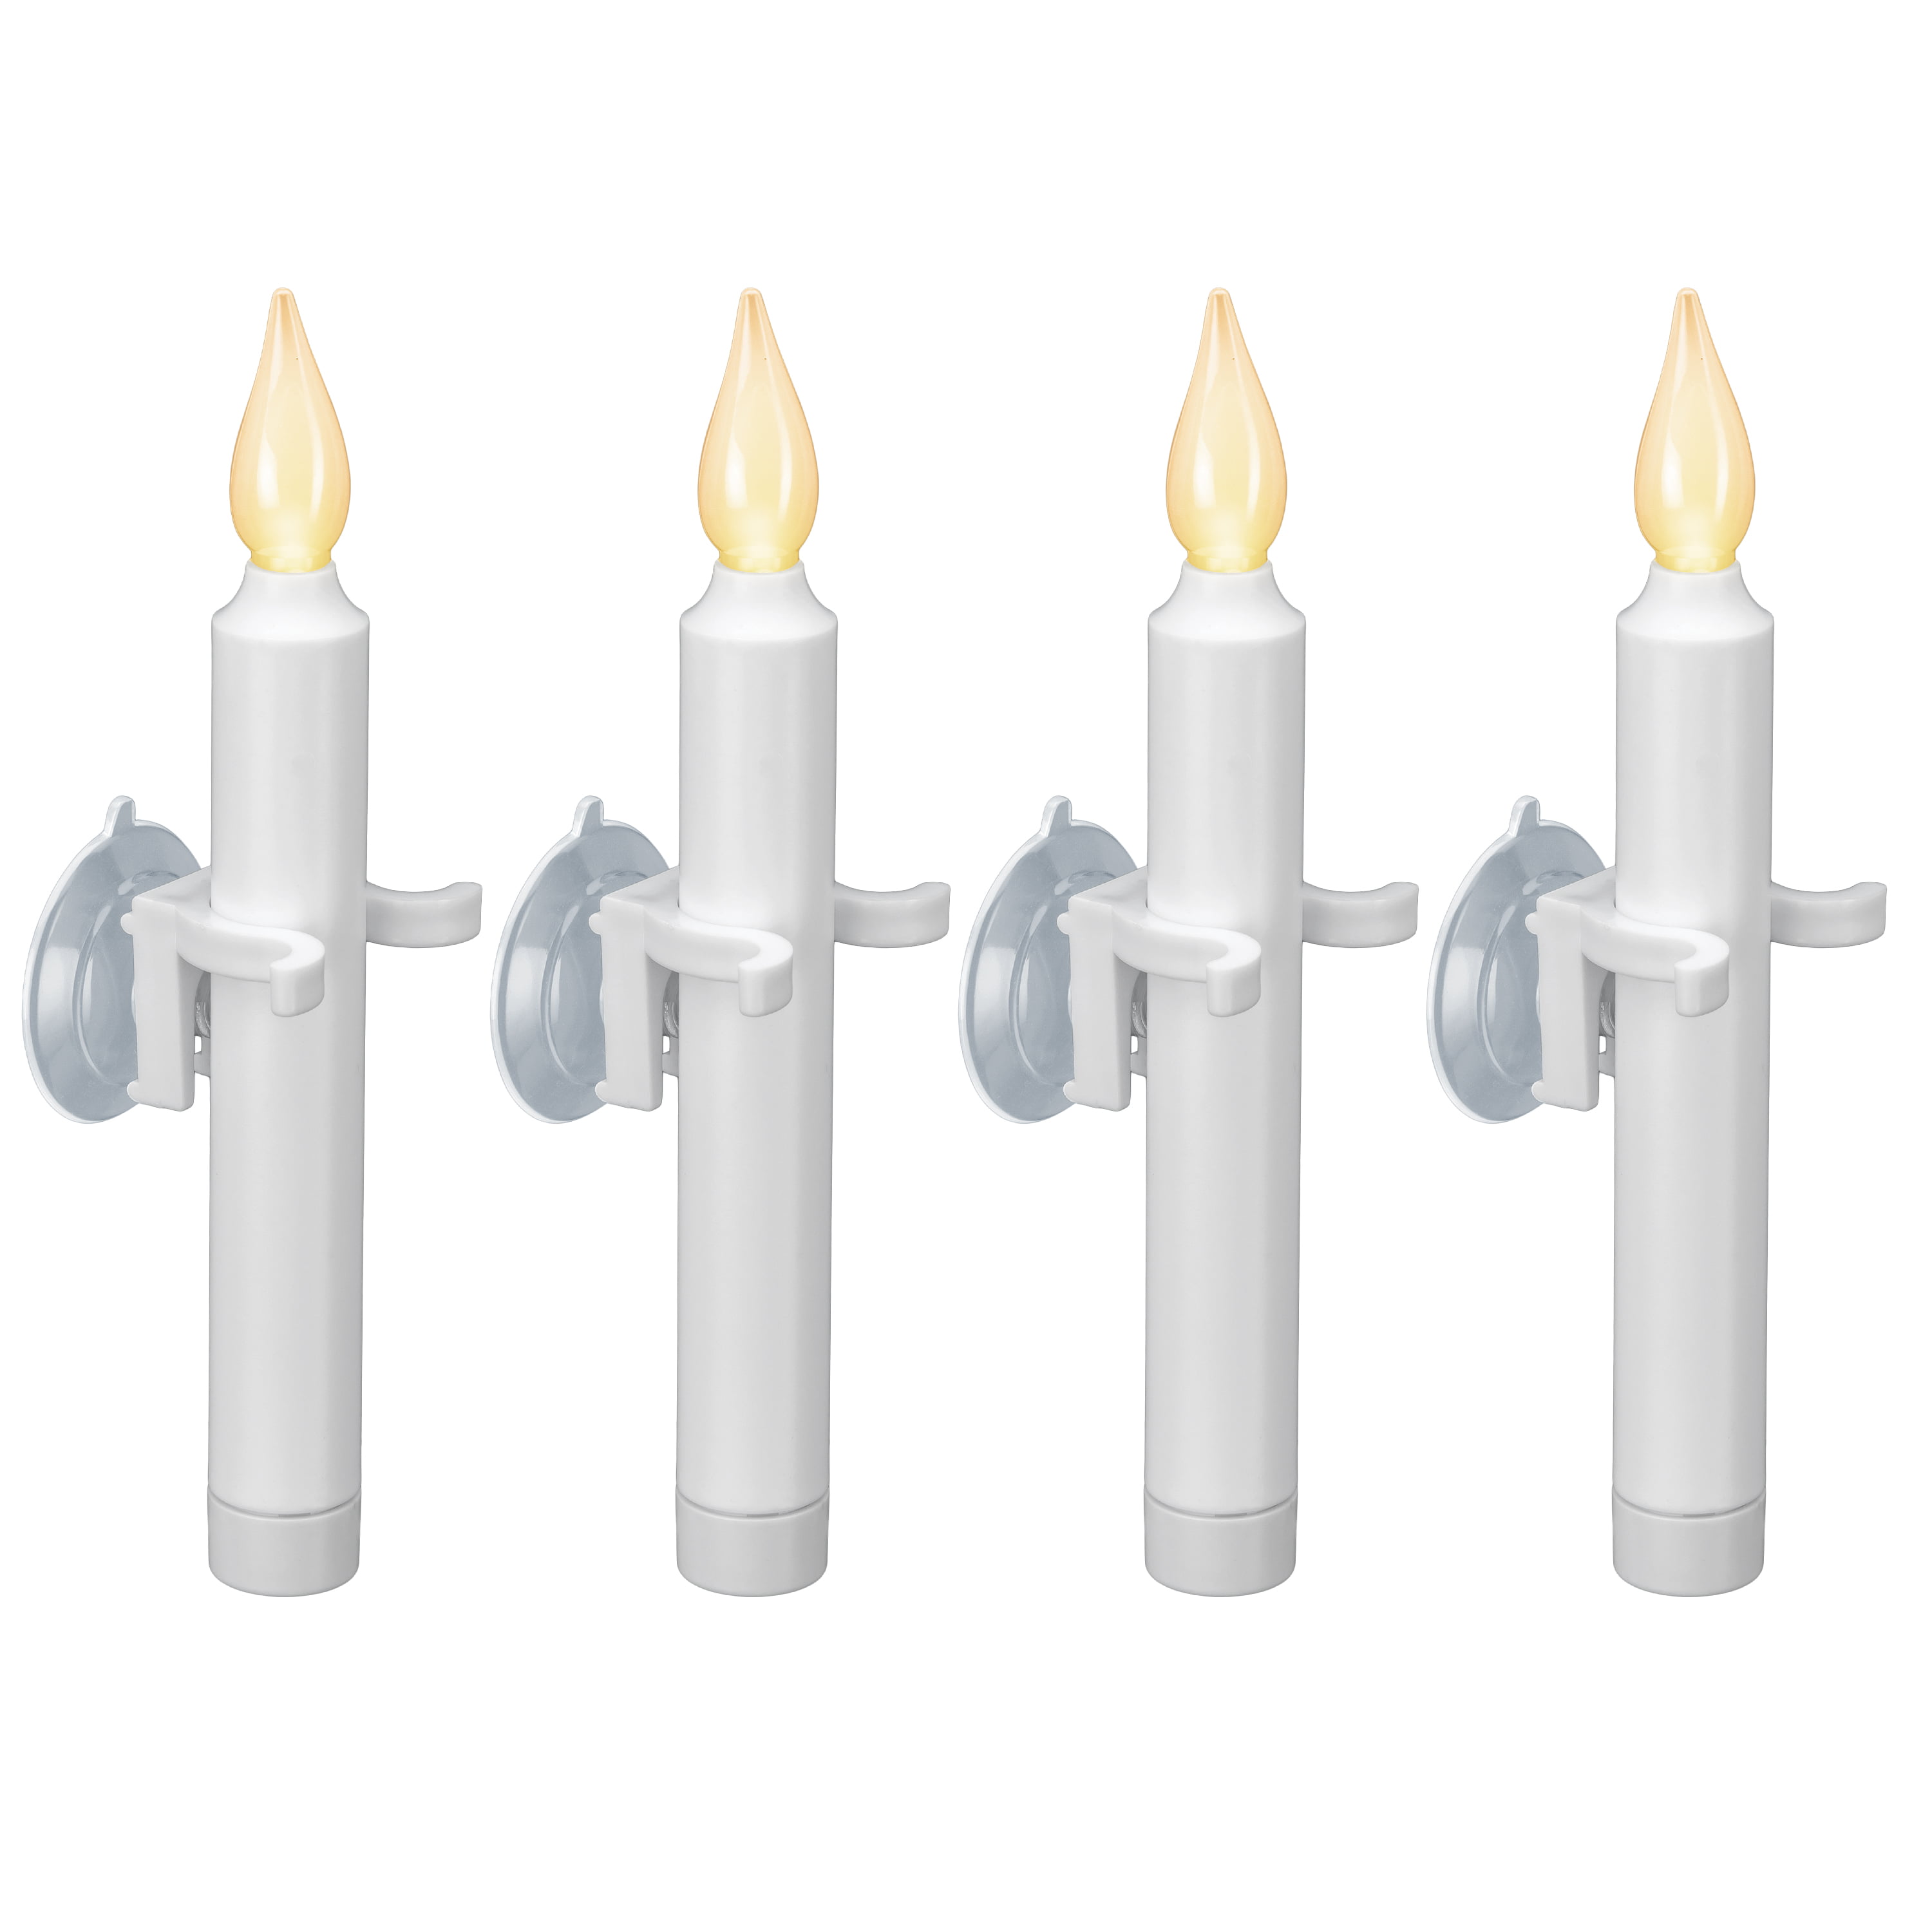 Pack of 4, Antique Bronze Xodus Innovations VT-1650A 612 Vermont Battery Operated LED Window Candles with Flickering Warm White Flame Automatic Timer